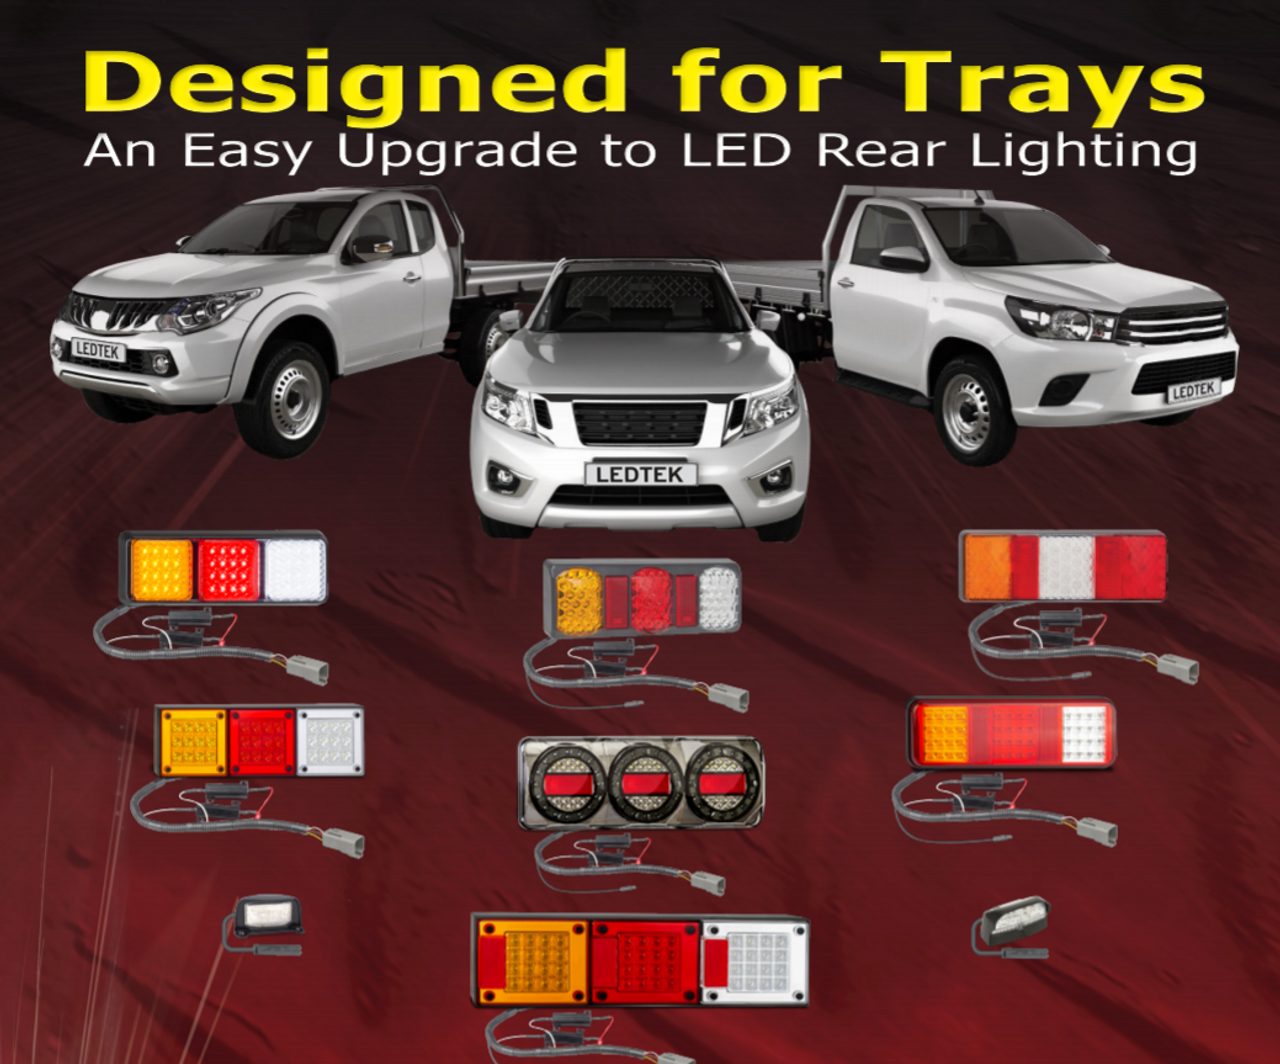 280ARWM2LR12/450+PATCHTRITON-MN - Vehicle LED Patch Cable System. Designed for Trays. 280 Series Light. Stop, Tail, Indicator and Reverse. 12v Only. Lamp with Conversion Cable. Application to Suit Mitsubishi Triton MN. Autolamp. Ultimate LED.